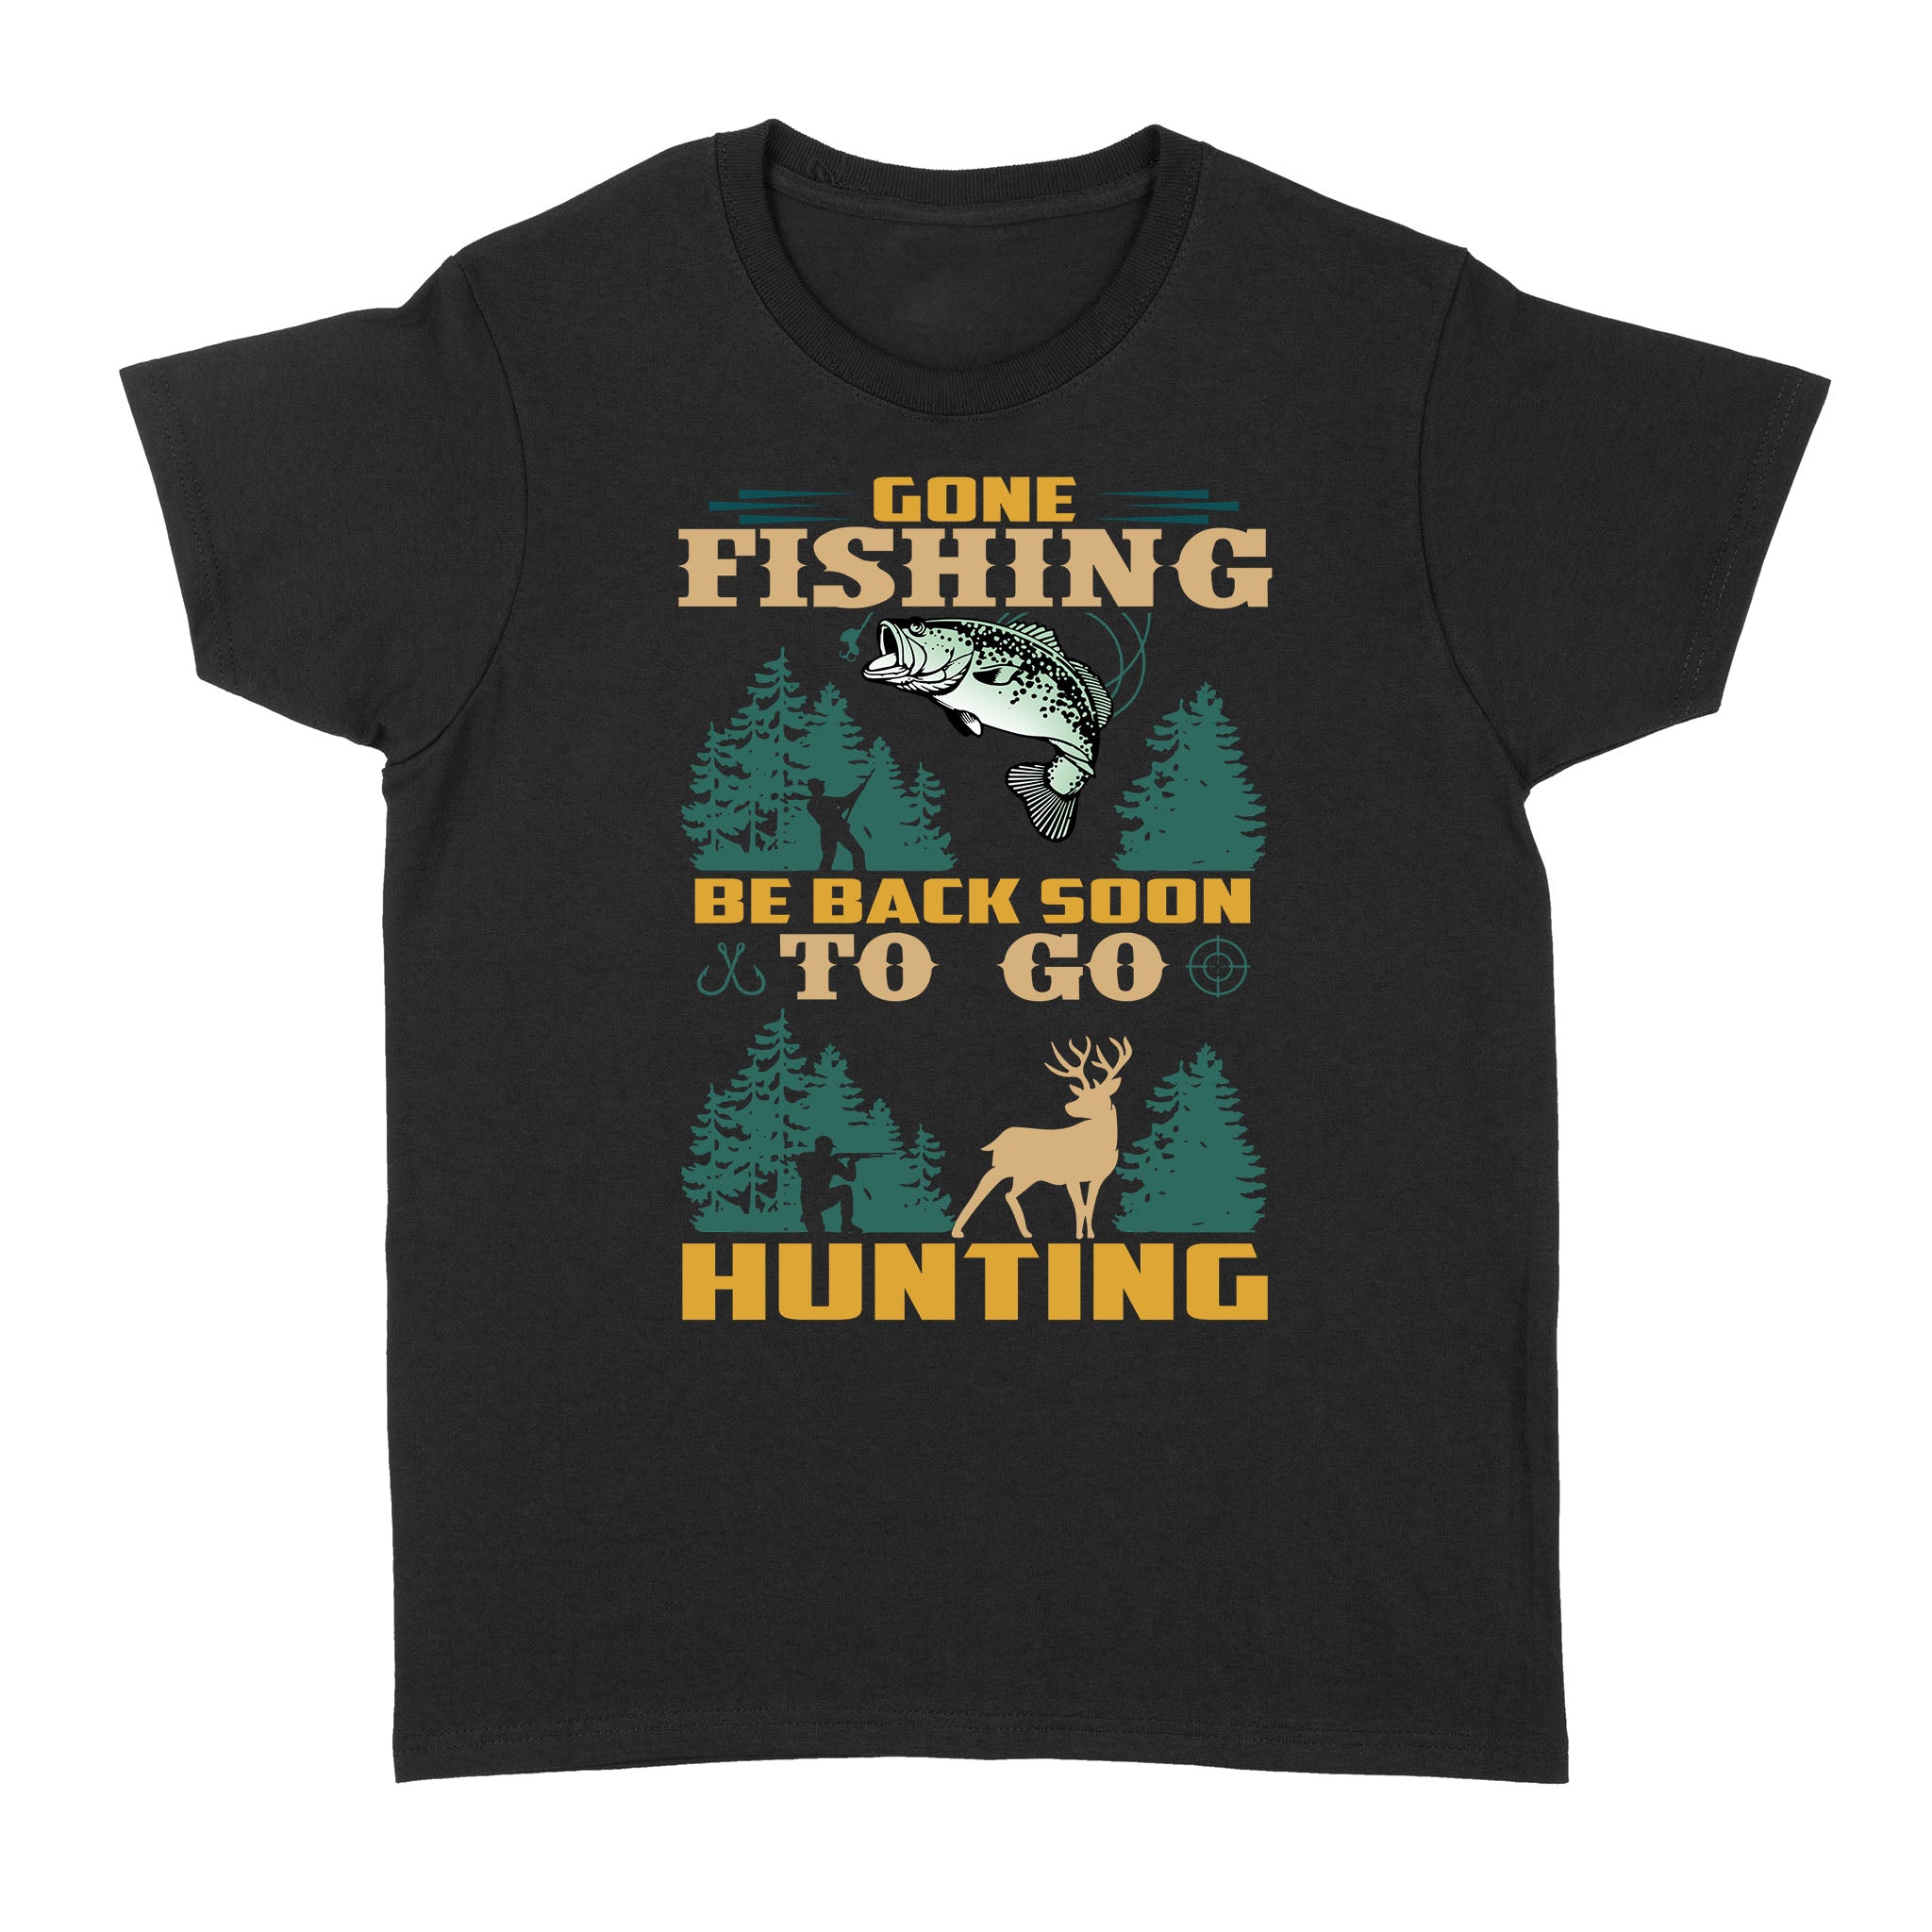 Gone fishing be back soon to go hunting, funny hunting fishing